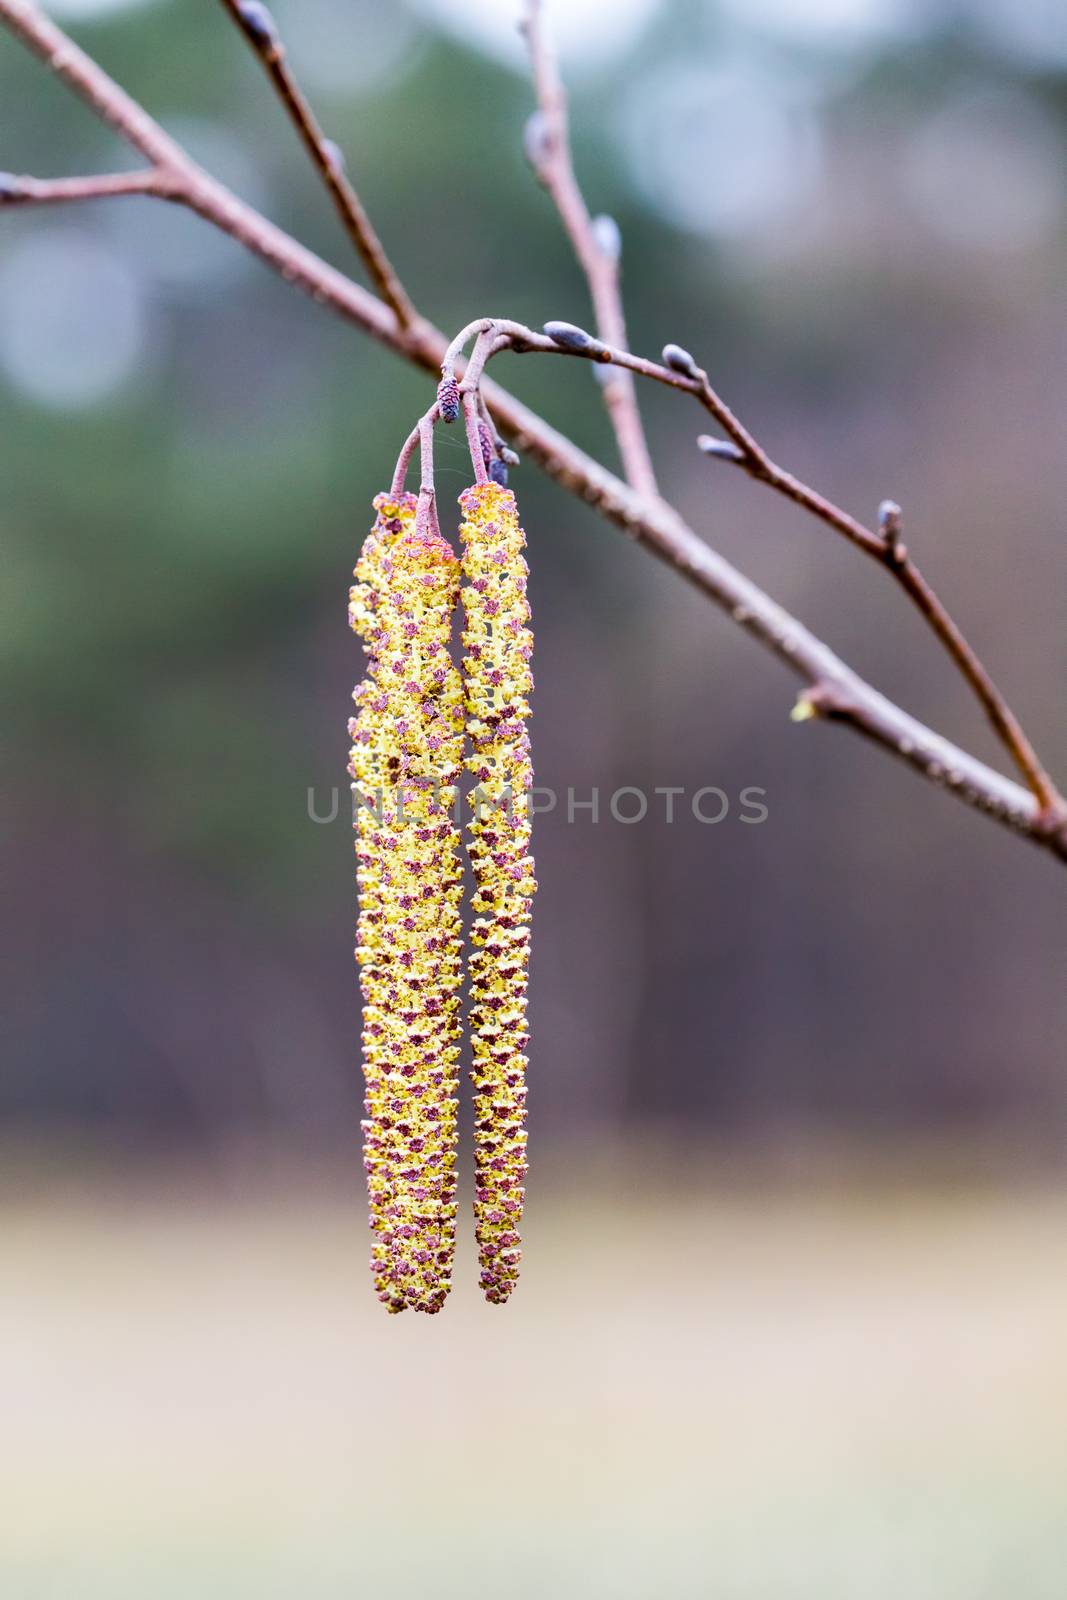 Alder twigs with yellow hanging catkins in spring by BenSchonewille